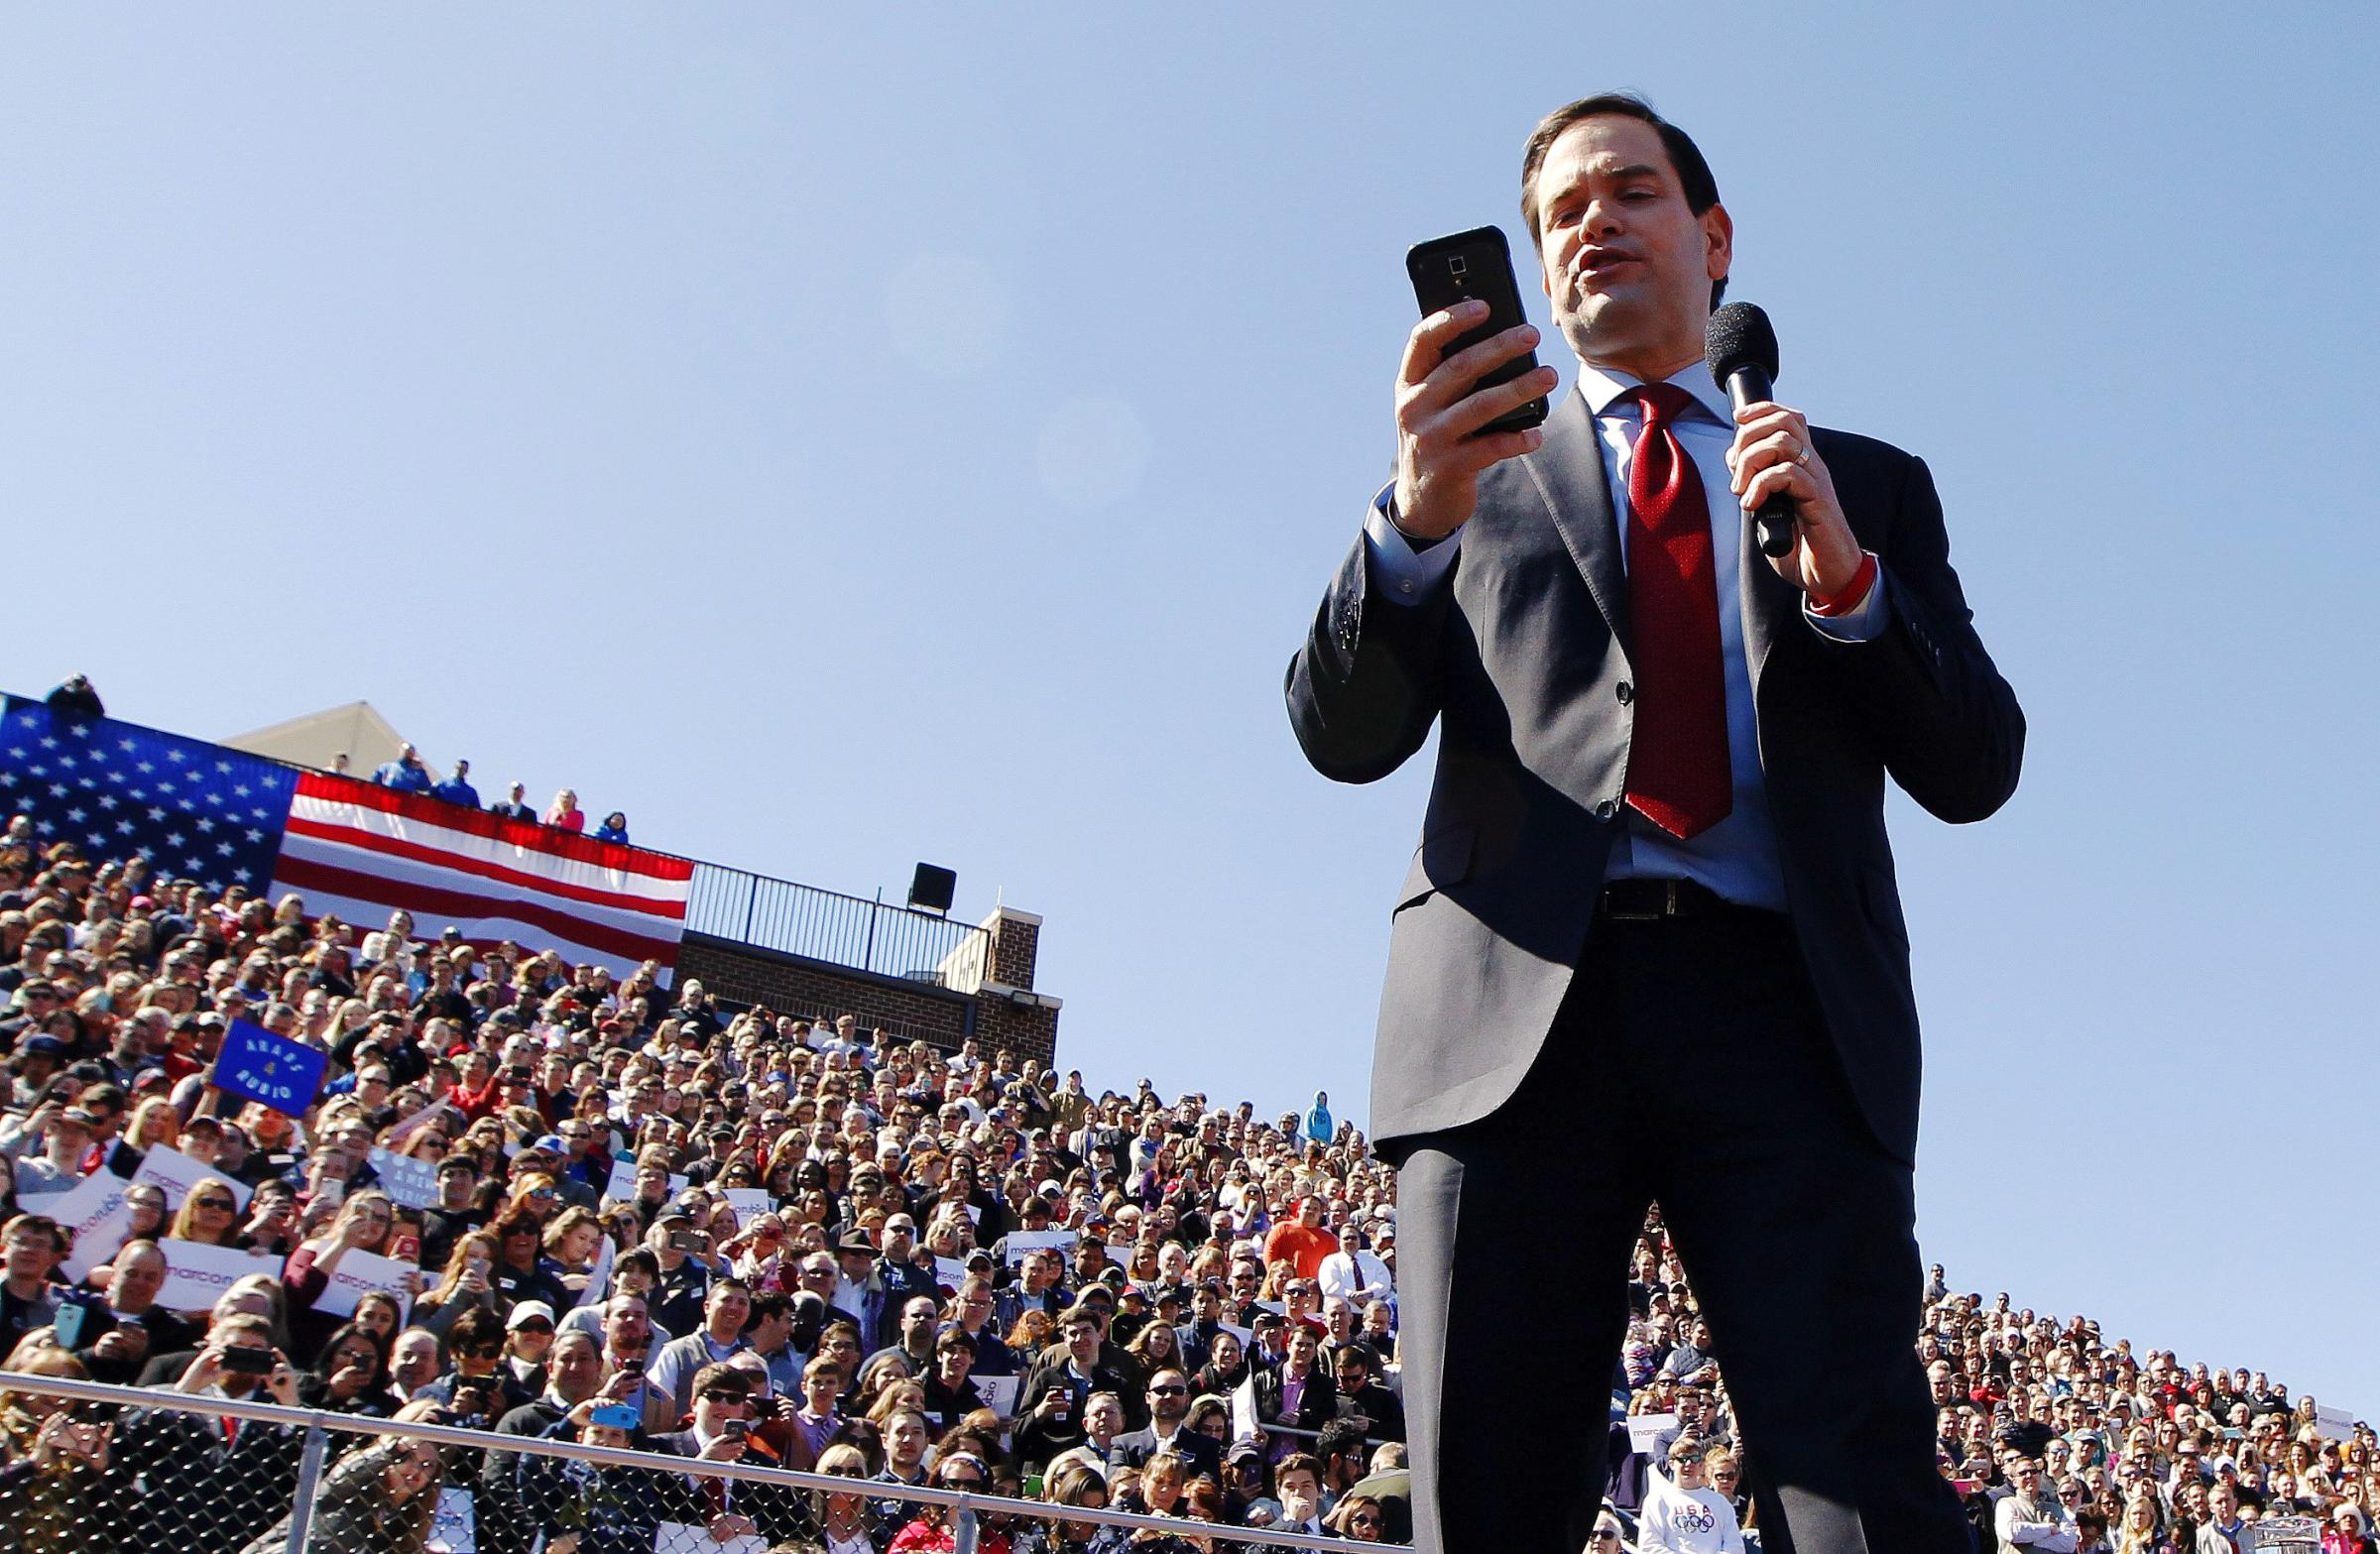 Republican presidential candidate, Florida Sen. Marco Rubio reads tweets from Donald Trump during a rally at Mount Paran Christian school in Kennesaw, Ga. on Feb. 27.